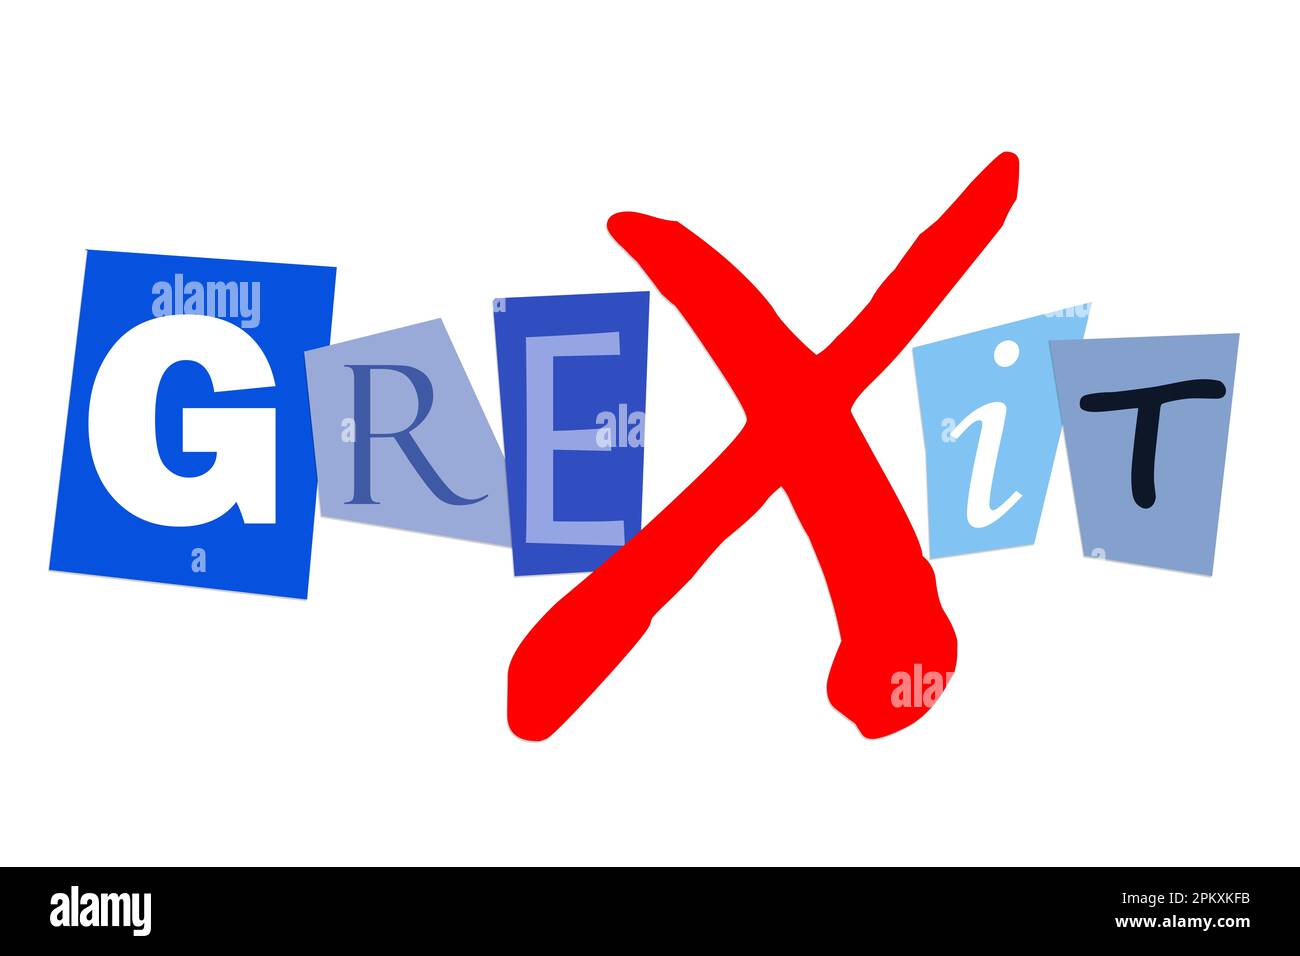 Grexit greek financial debt crisis may lead to greek euro exit Stock Photo